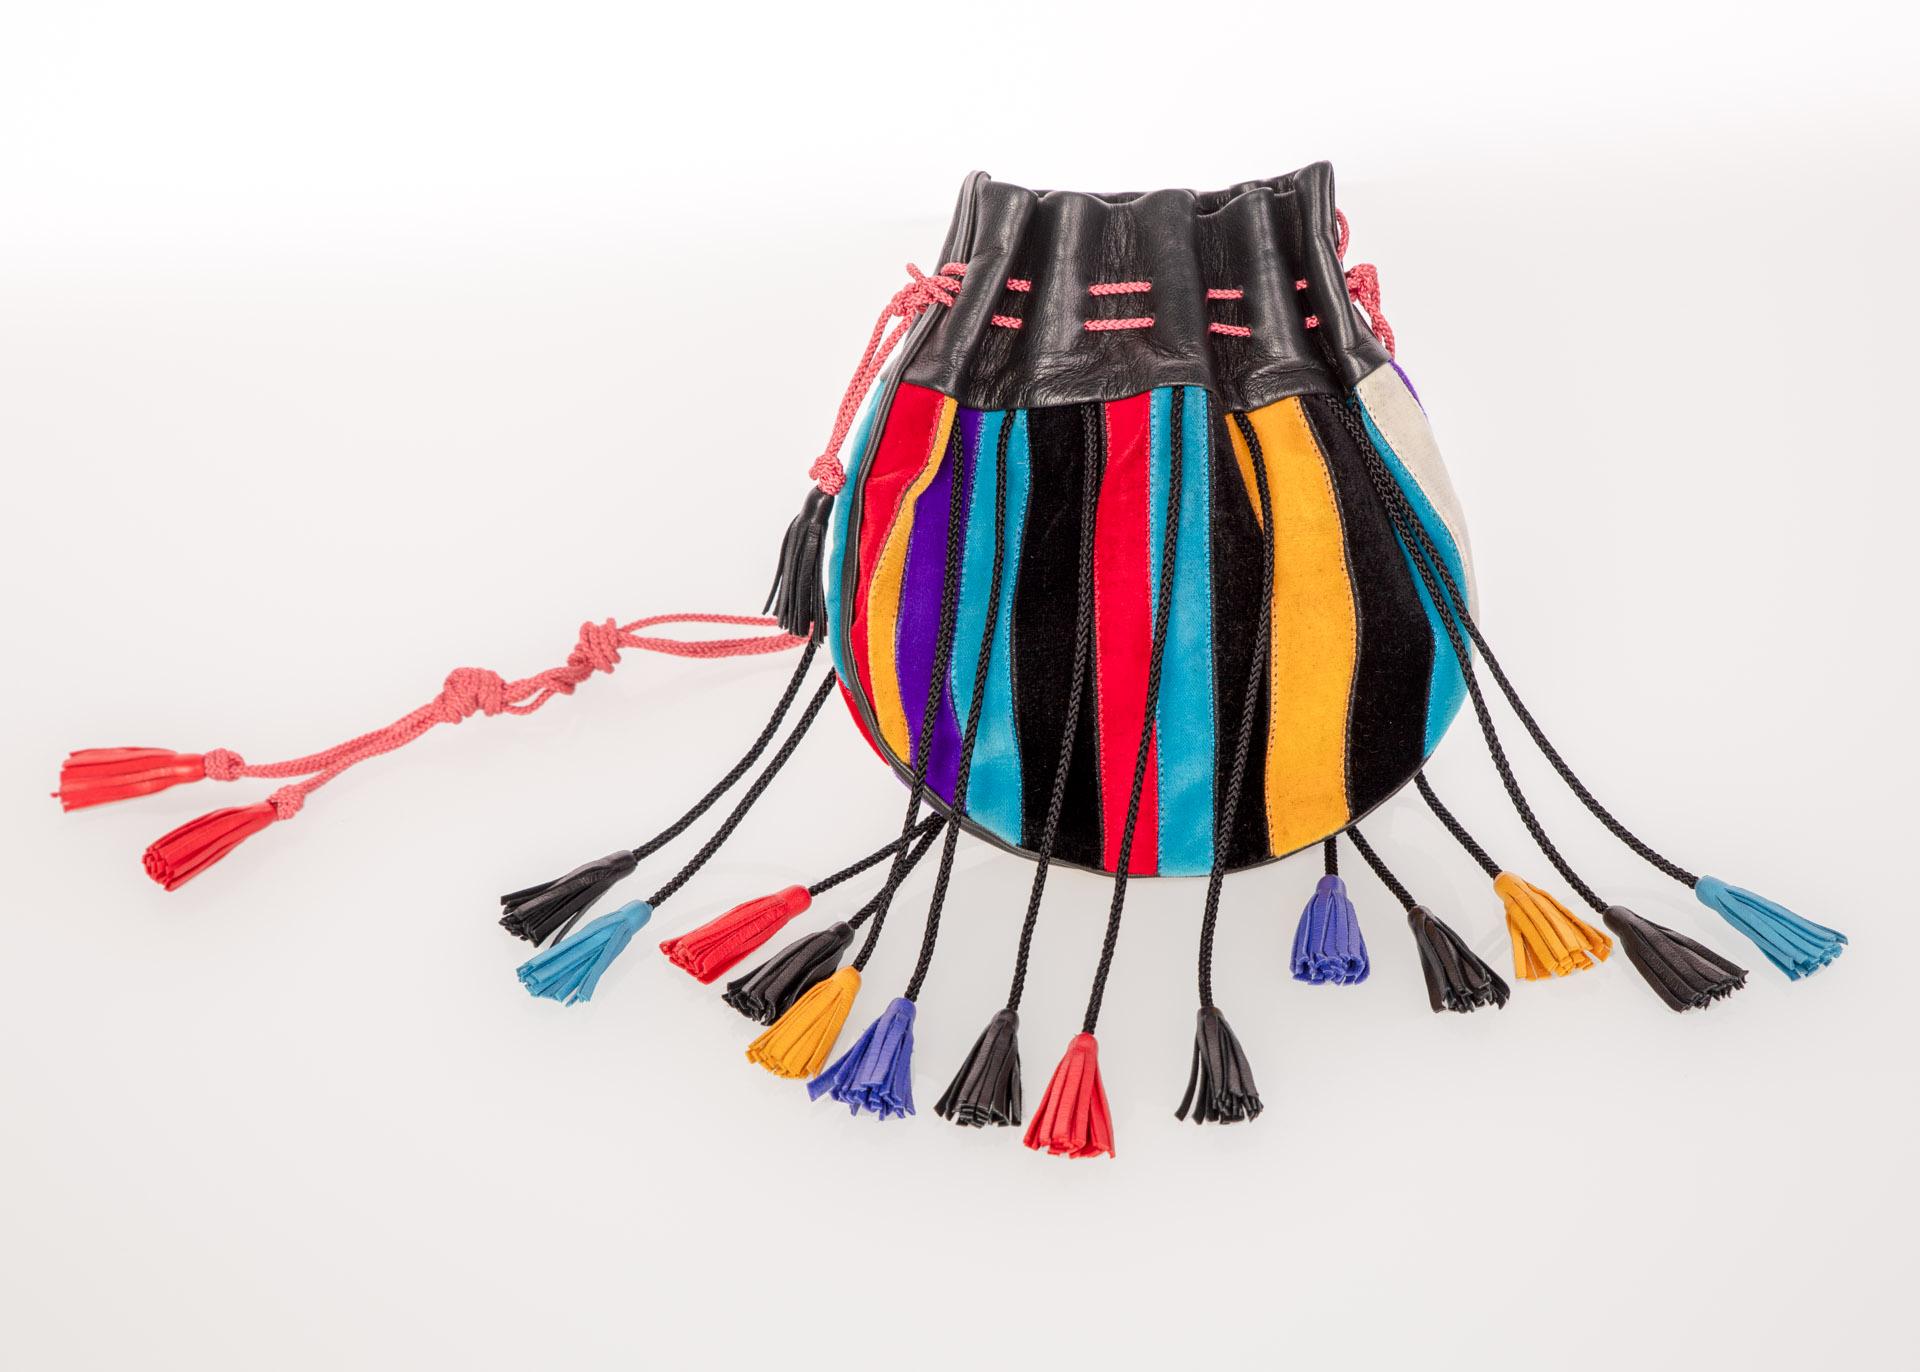 Notably involved in several art scenes internationally, at times, these influences from different movements can be seen in Saint Laurent work. In this 1970s multi-color crossbody, the color combination is in line with the rich hues of pop art style.